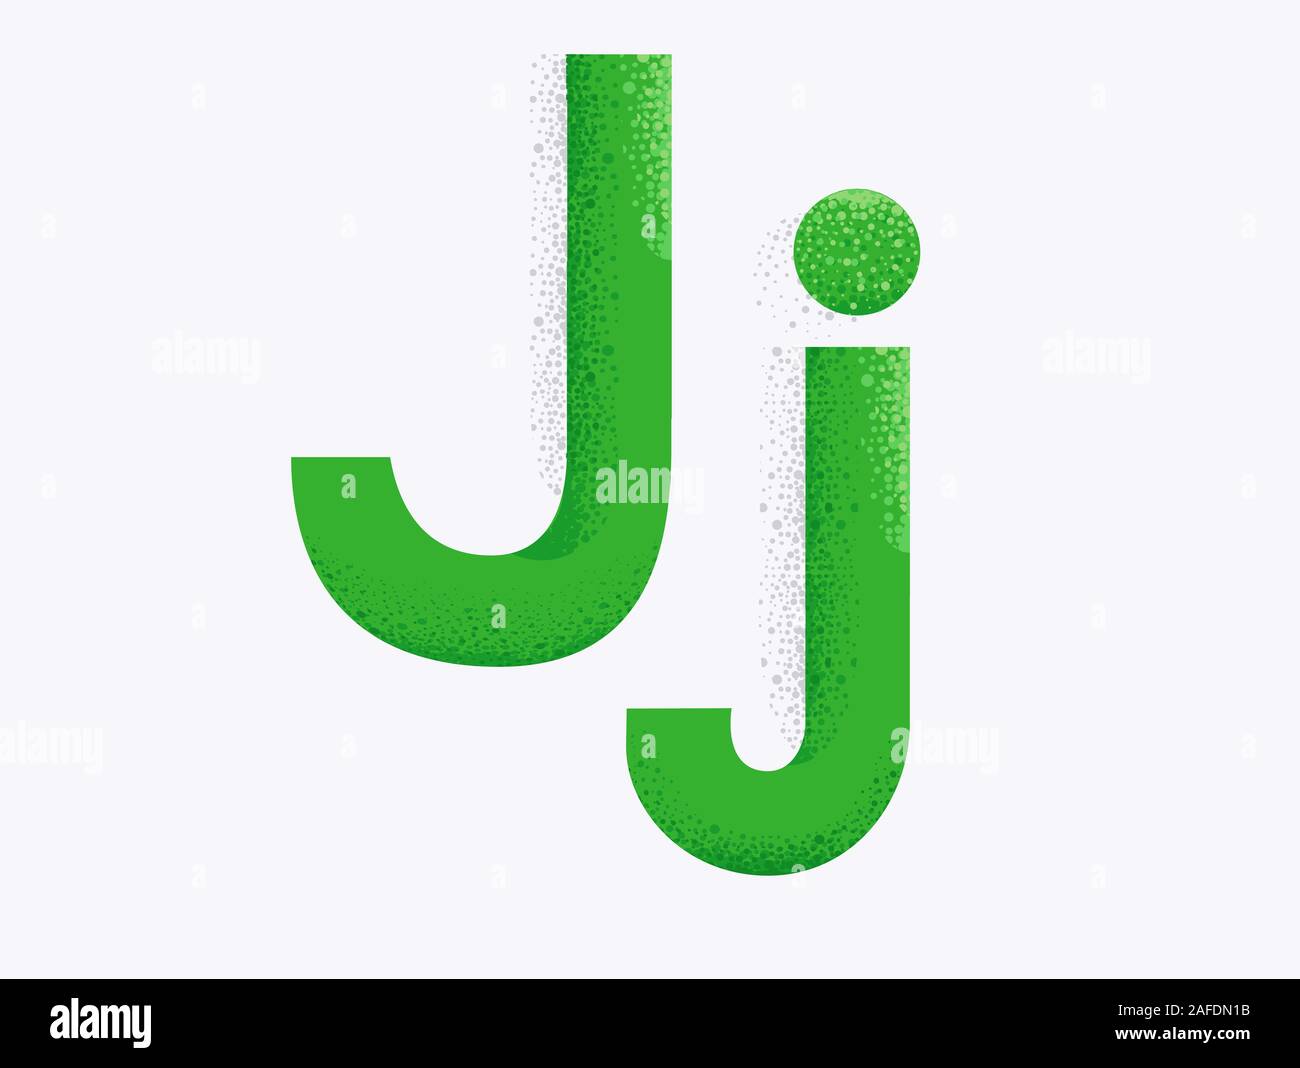 Illustration of Decorative Alphabet with Capital and Small Letter J and Dust Particle Effect Stock Photo